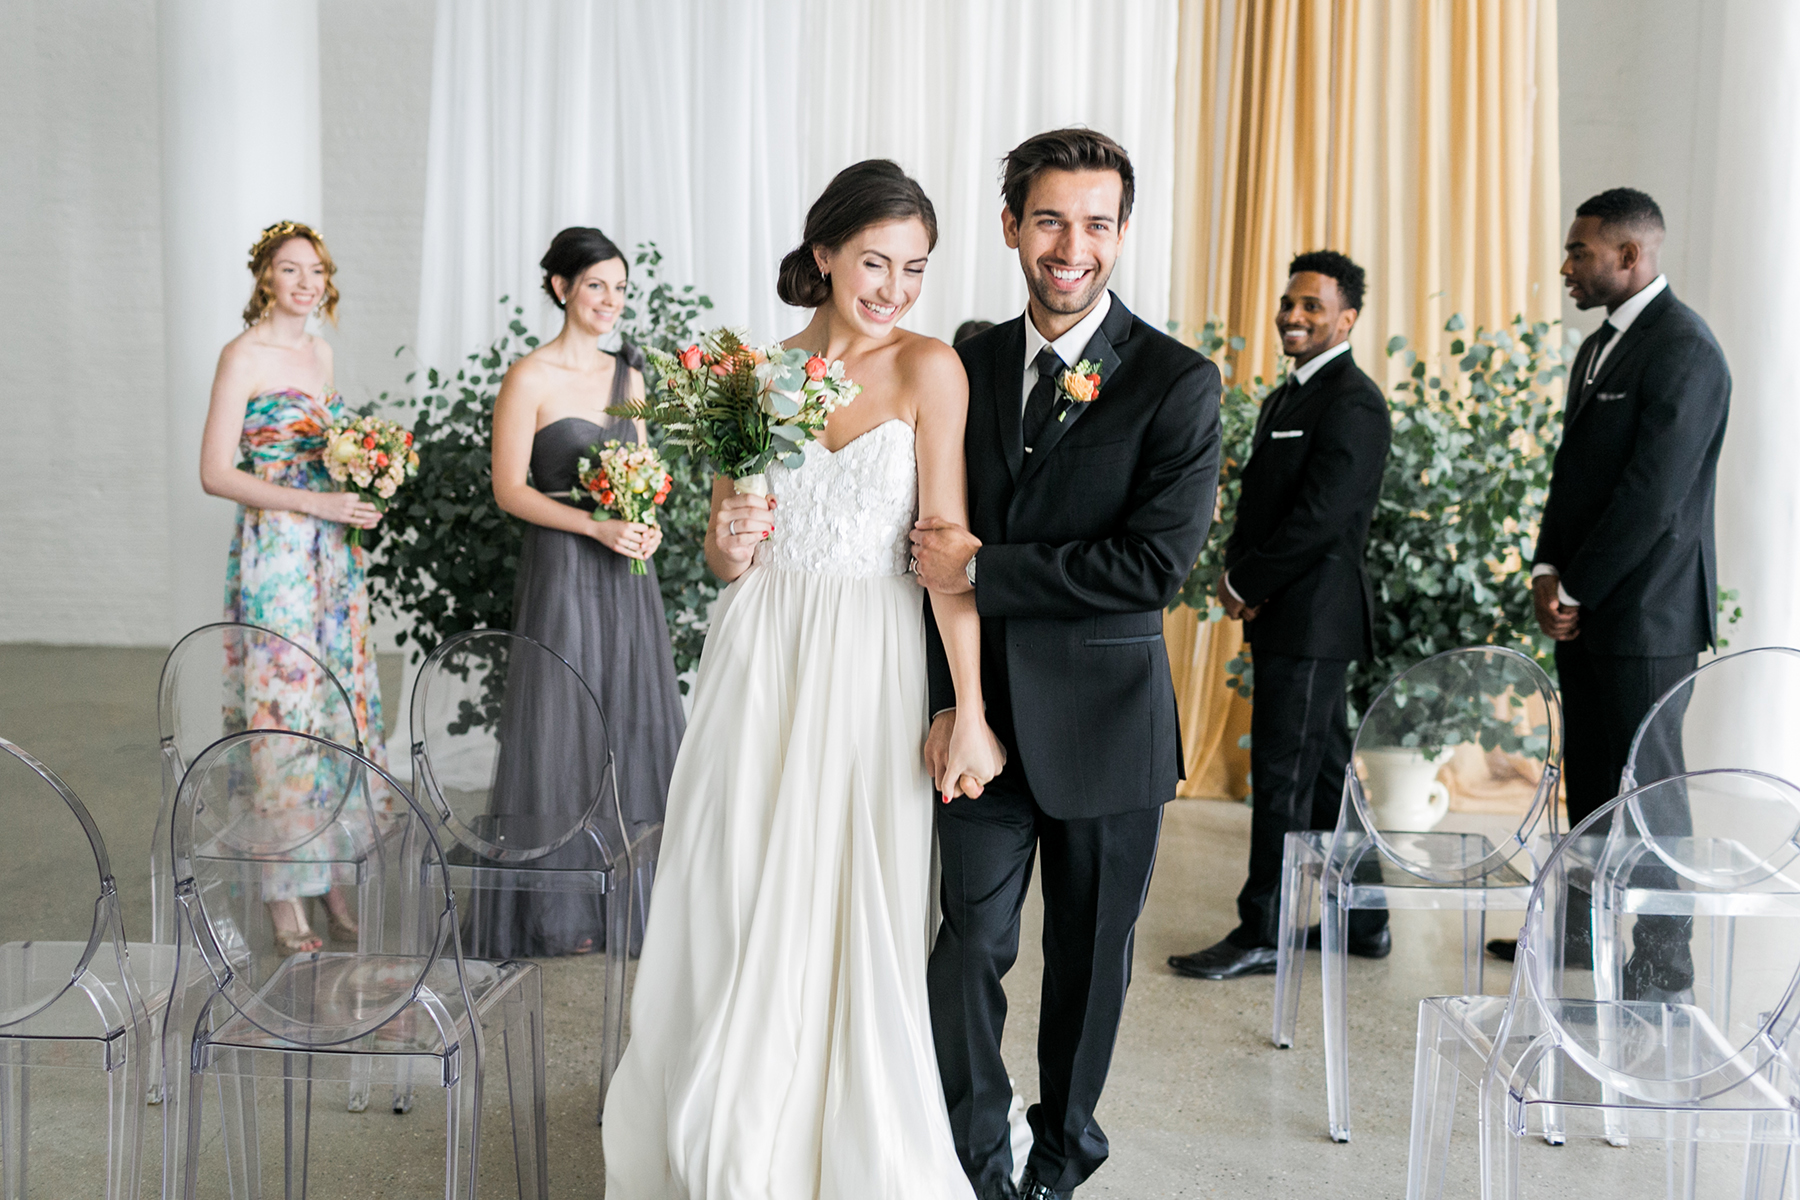 Chicago Wedding Ideas from Aisle Society